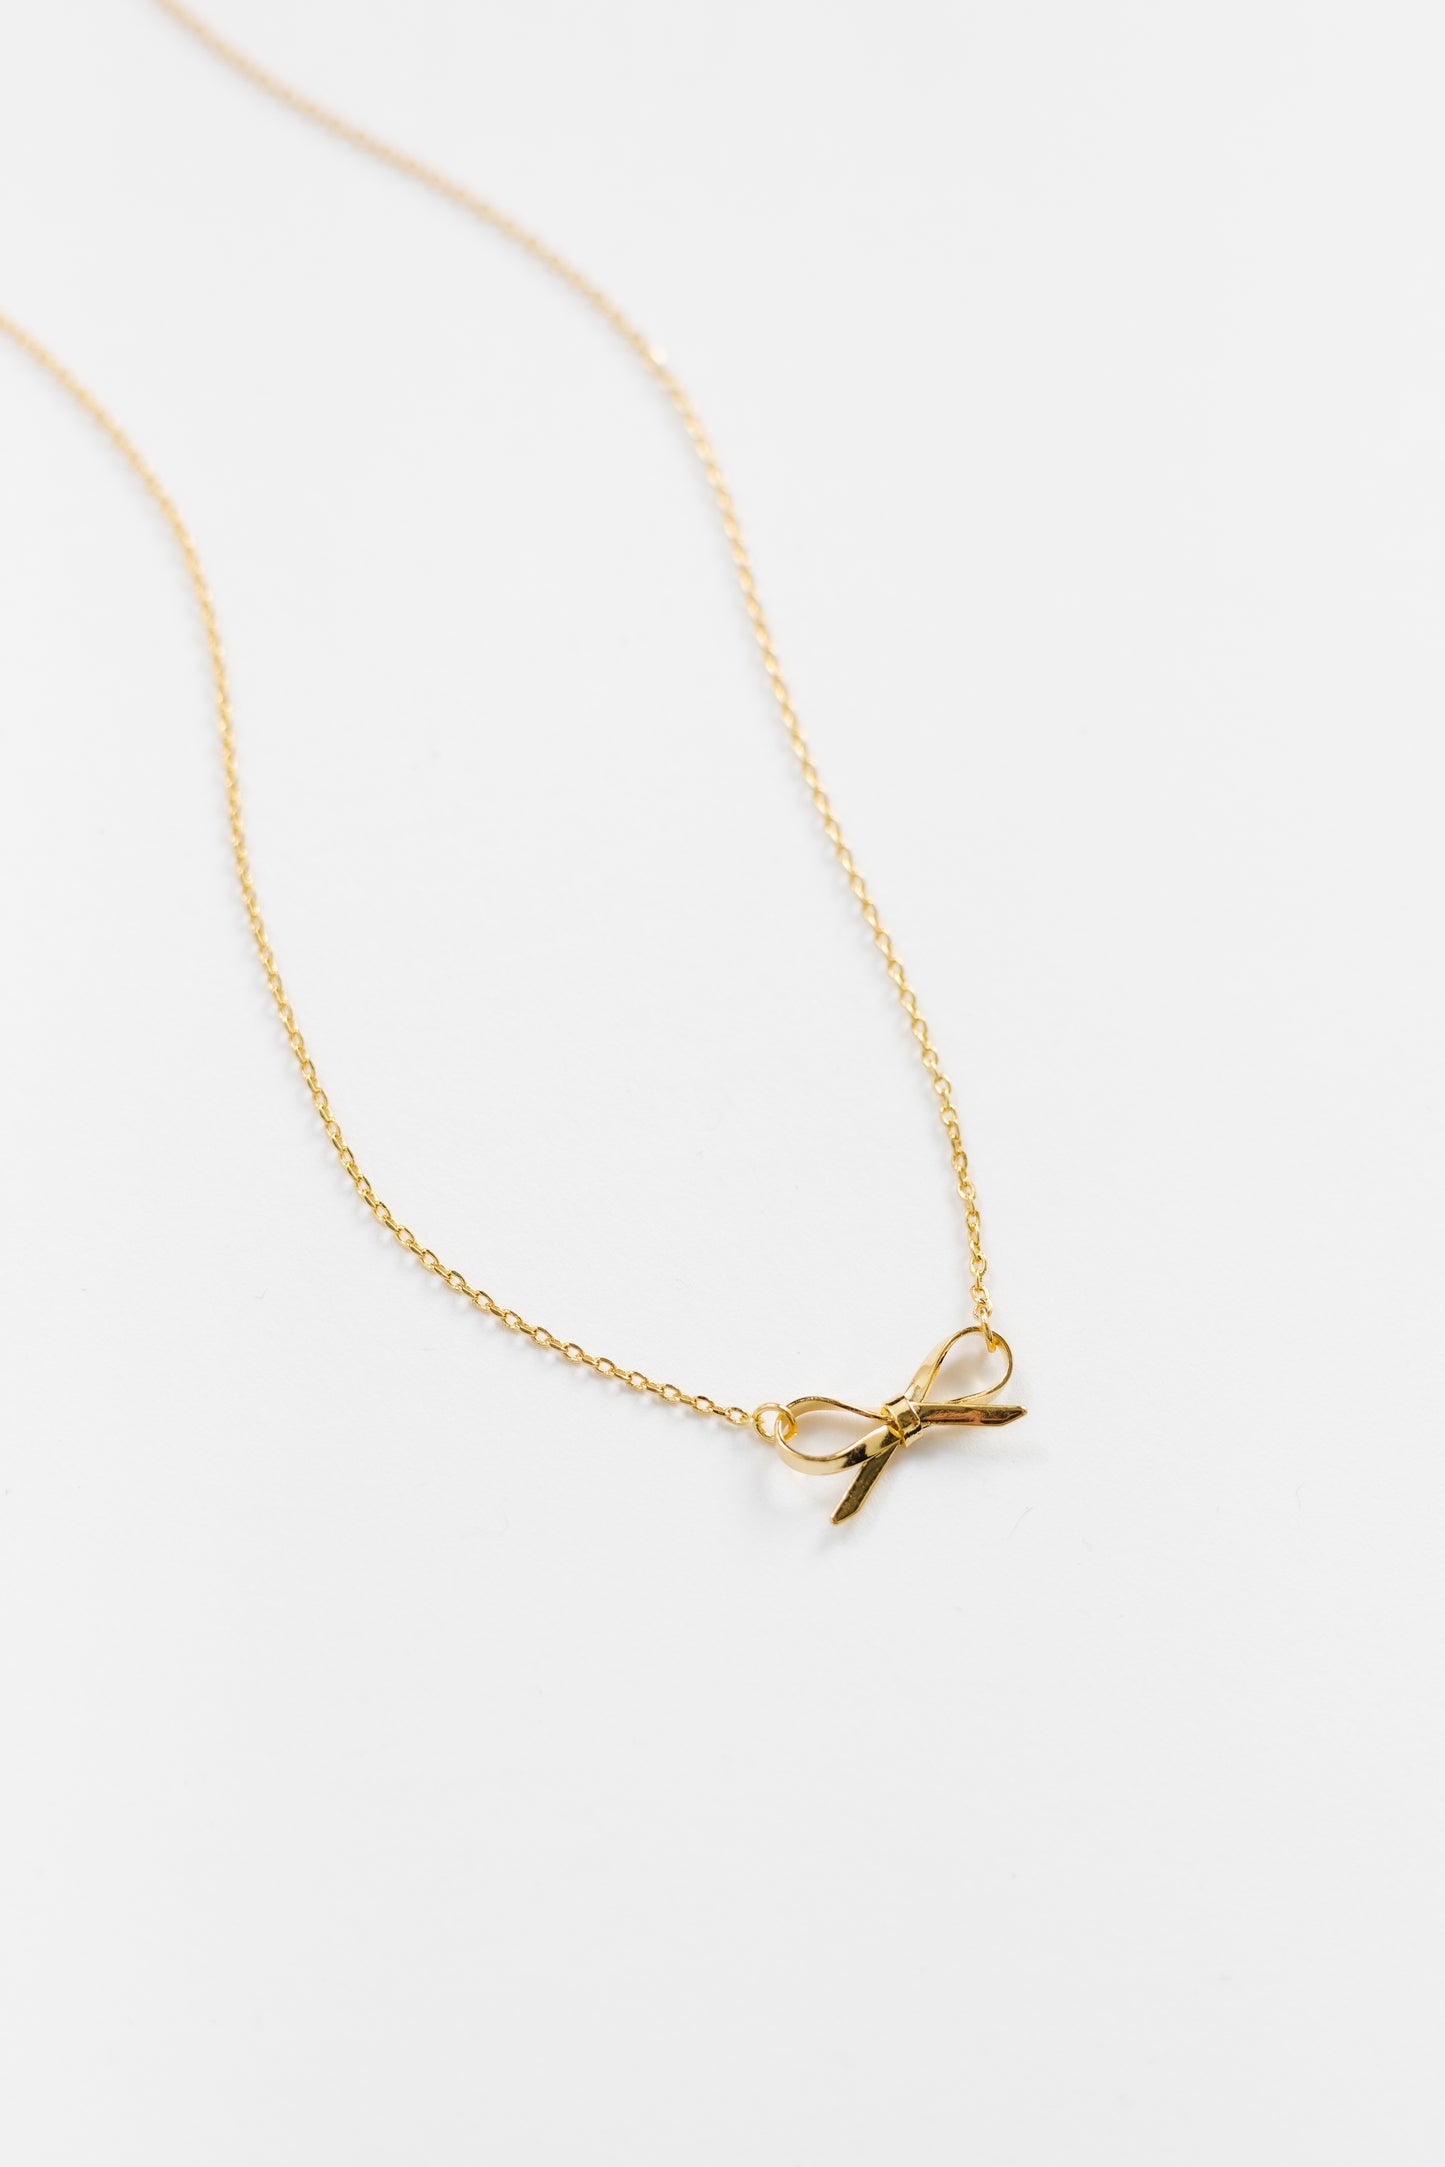 Cove Bow Necklace